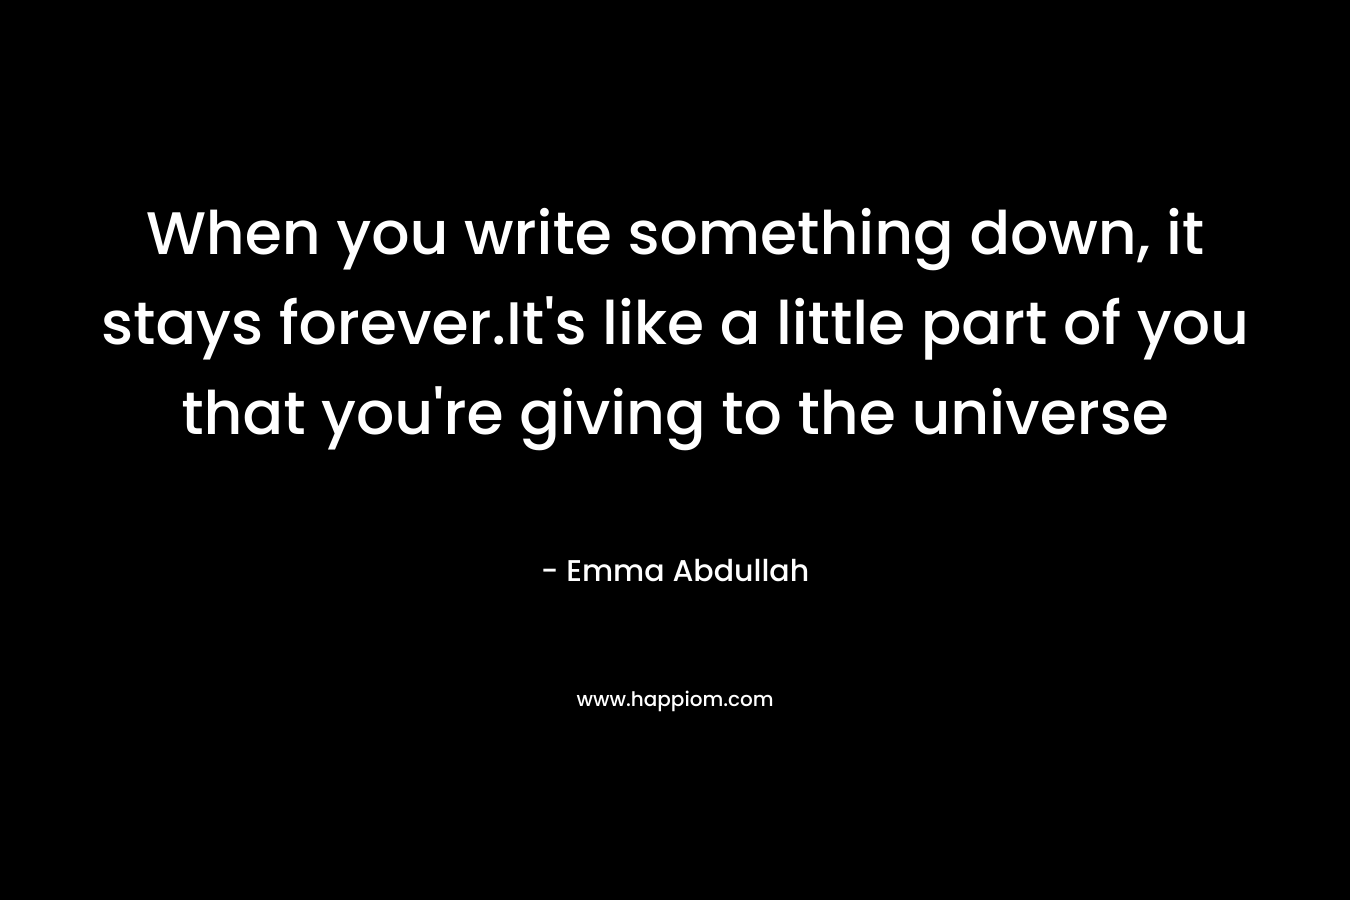 When you write something down, it stays forever.It's like a little part of you that you're giving to the universe